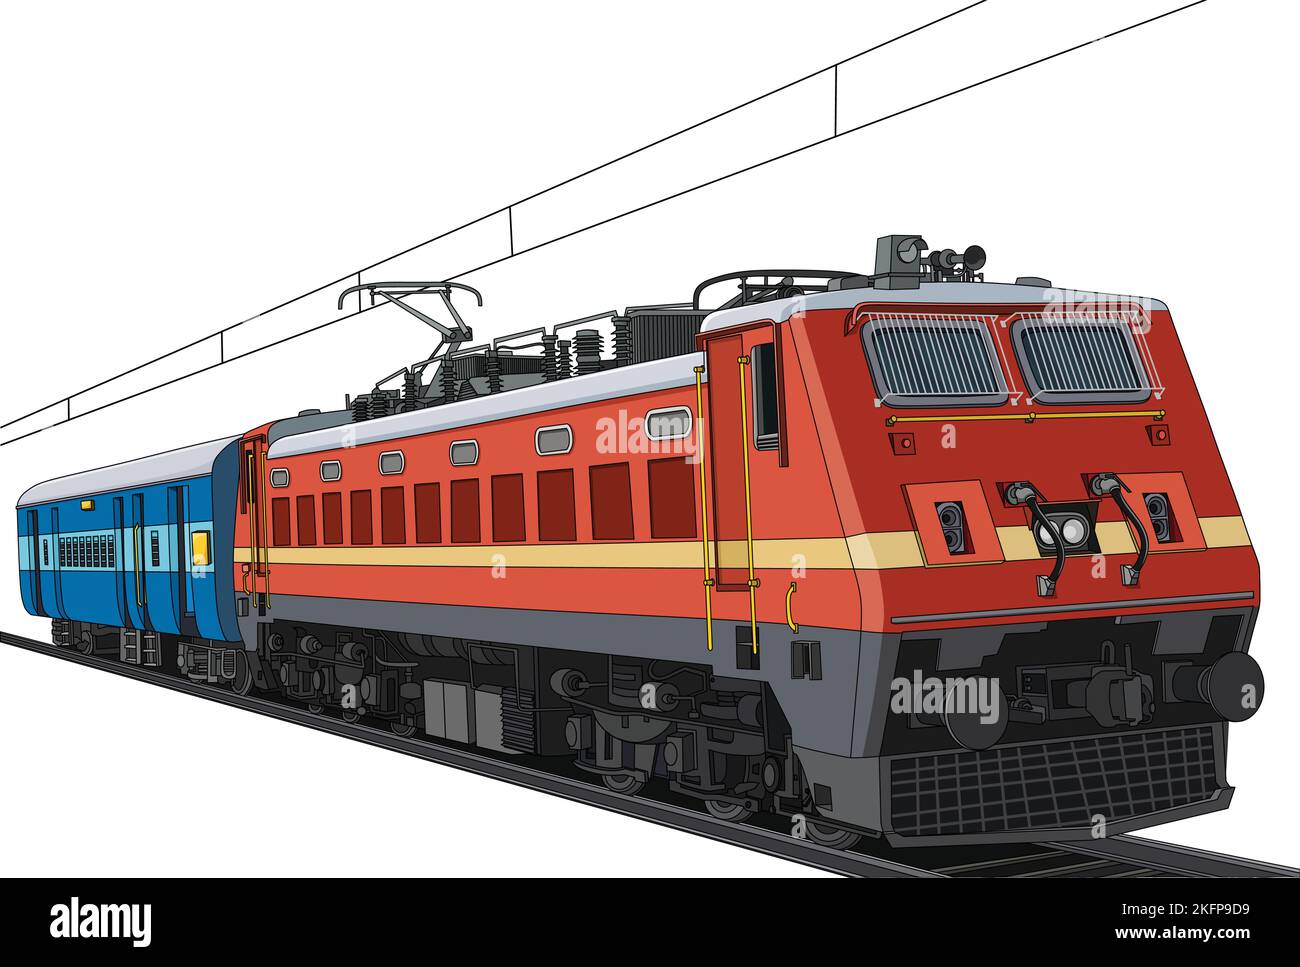 Passenger train india Stock Vector Images - Alamy